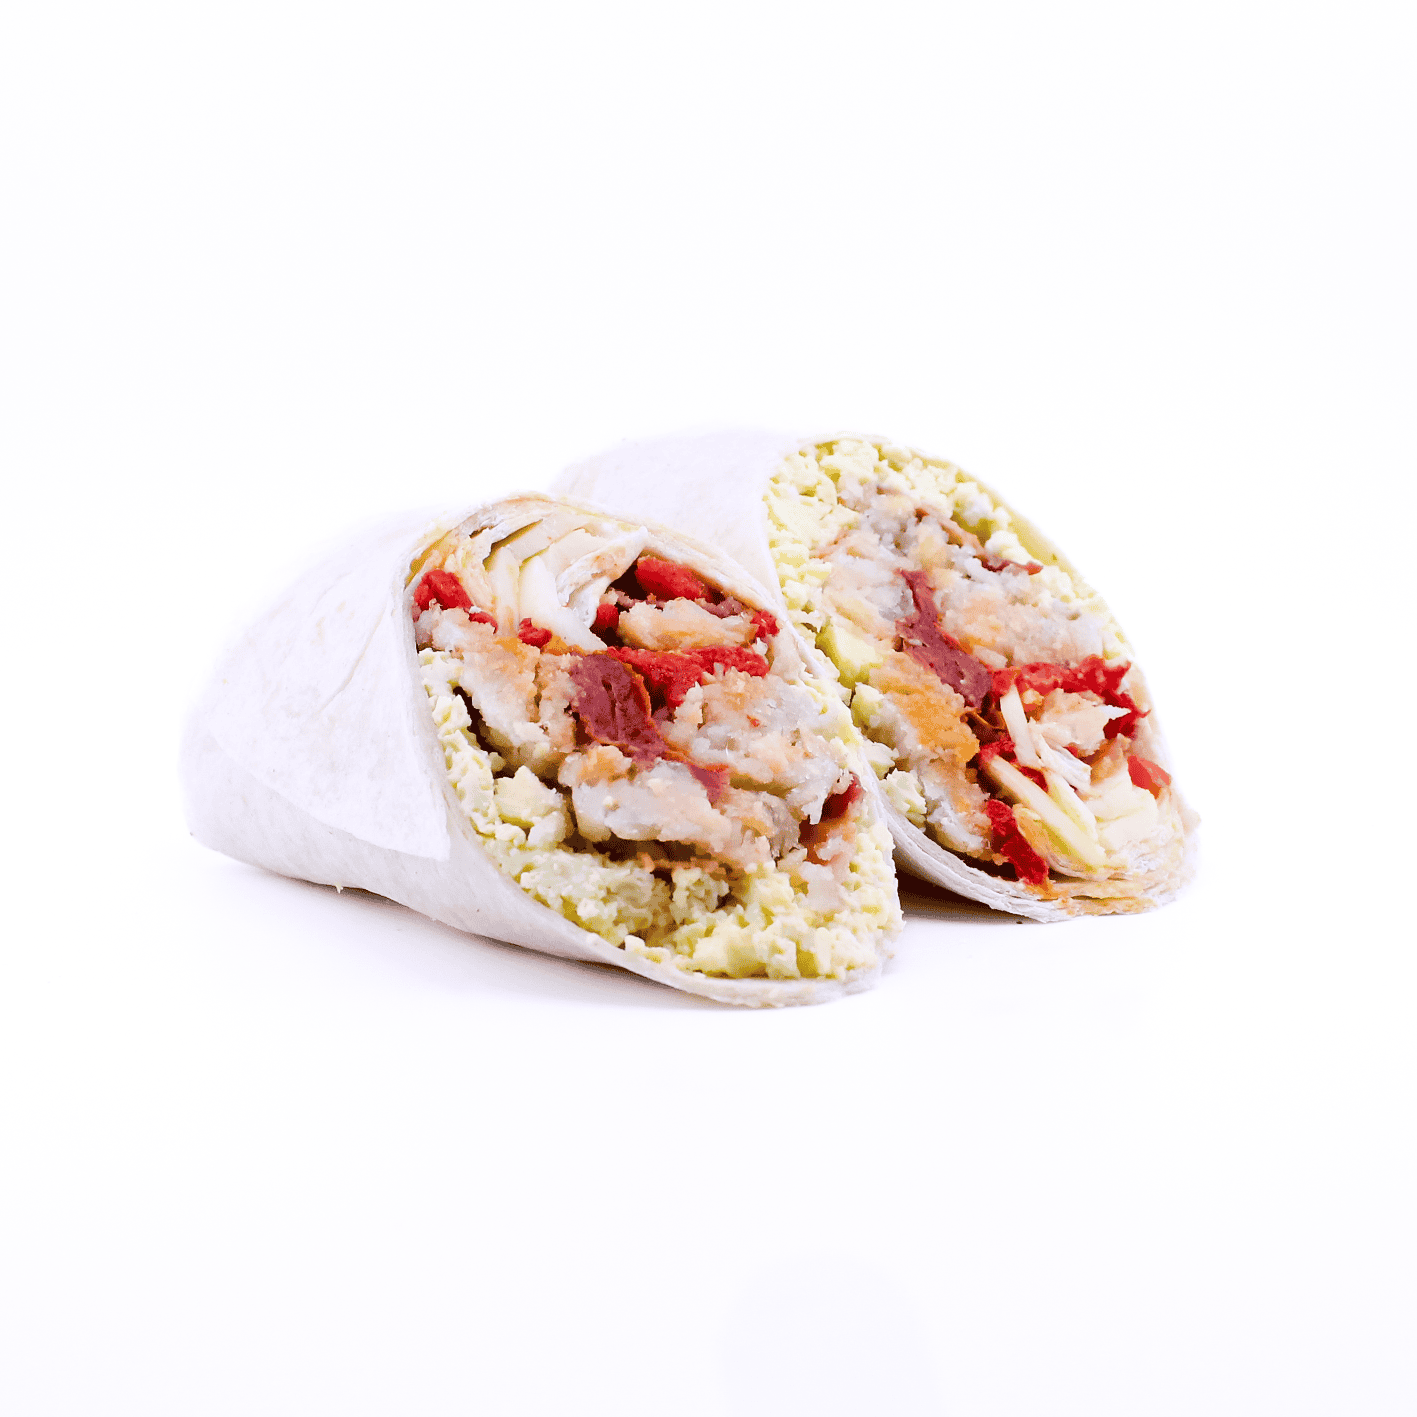 Scrambled egg, bacon, crispy potato hash, roasted red peppers, Cabot white cheddar cheese, roasted tomatoes, green goodness aioli, wrapped in a flour tortilla